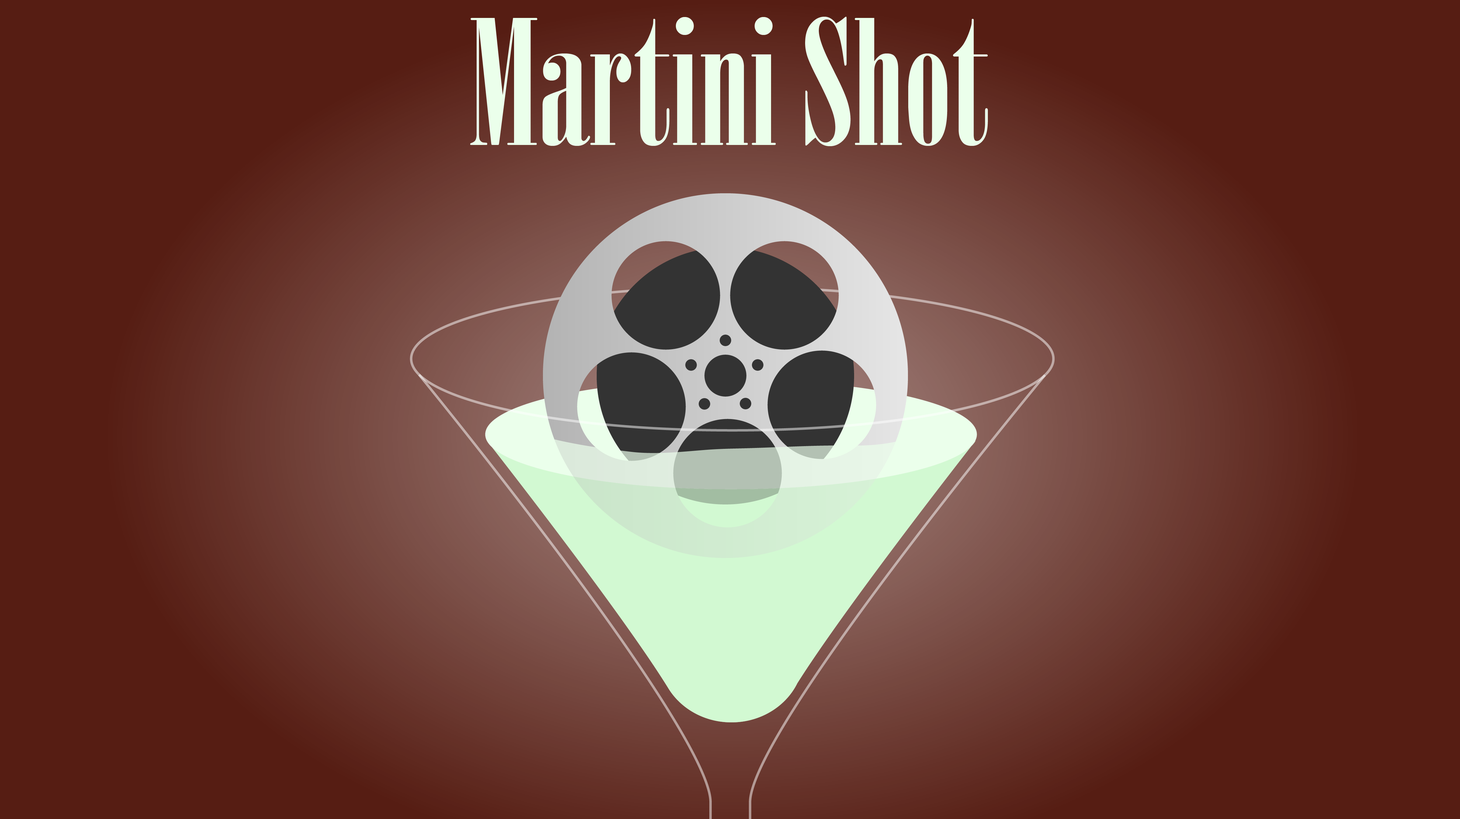 This is Rob Long and on today’s Martini Shot I talk about what it must be like to be down a well and to look up and see the stars, and why a place I know in Hollywood is trying to do something like that for homeless youth.